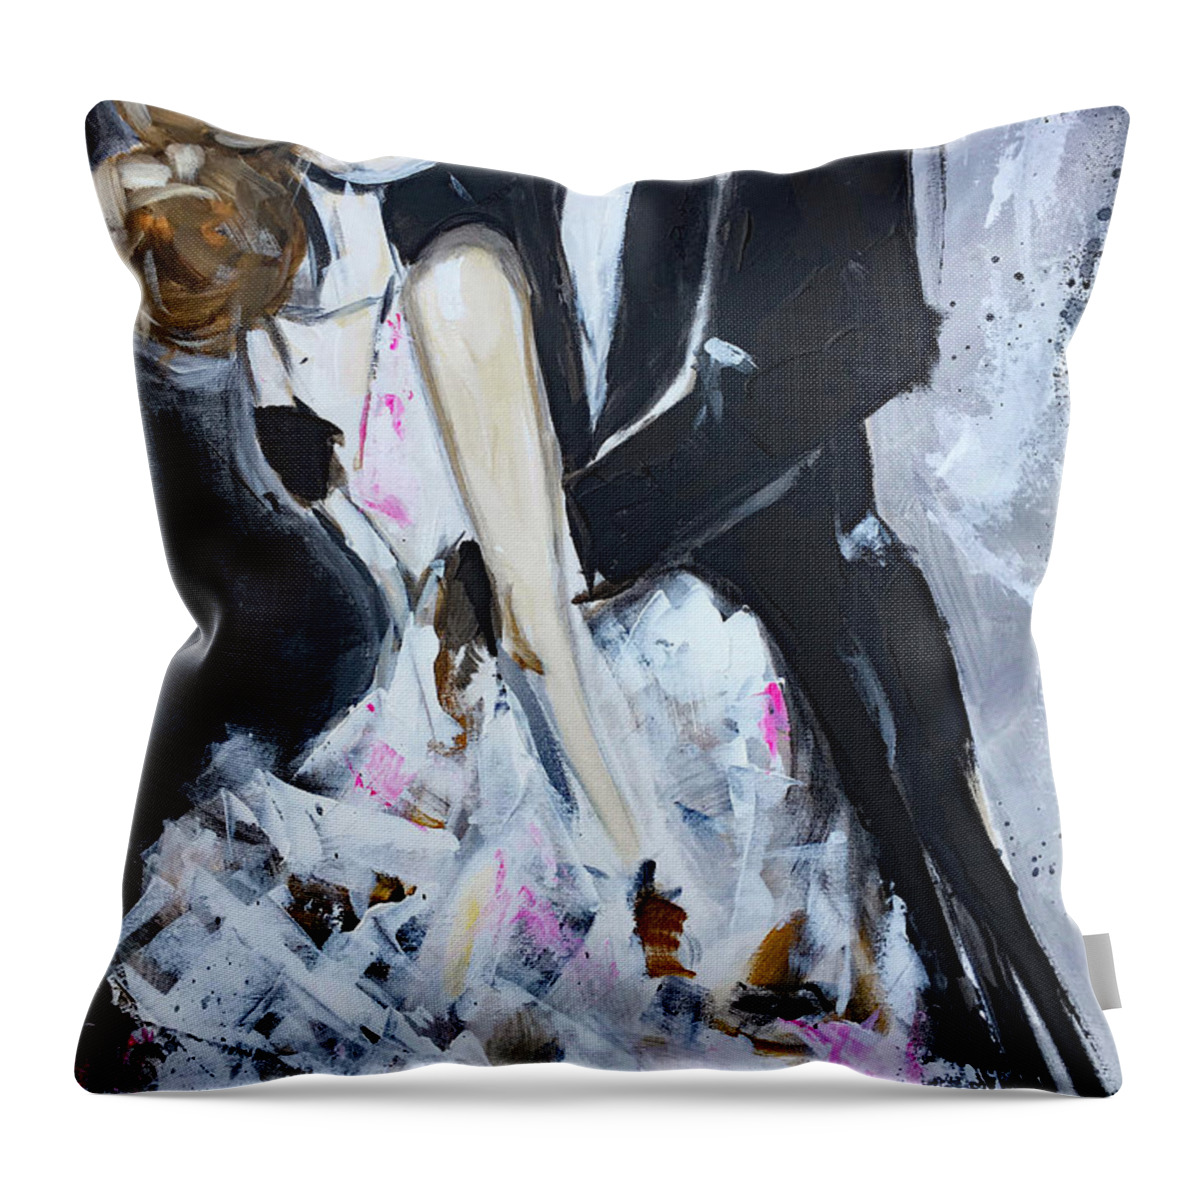 Just Married Throw Pillow featuring the painting Love by Roxy Rich